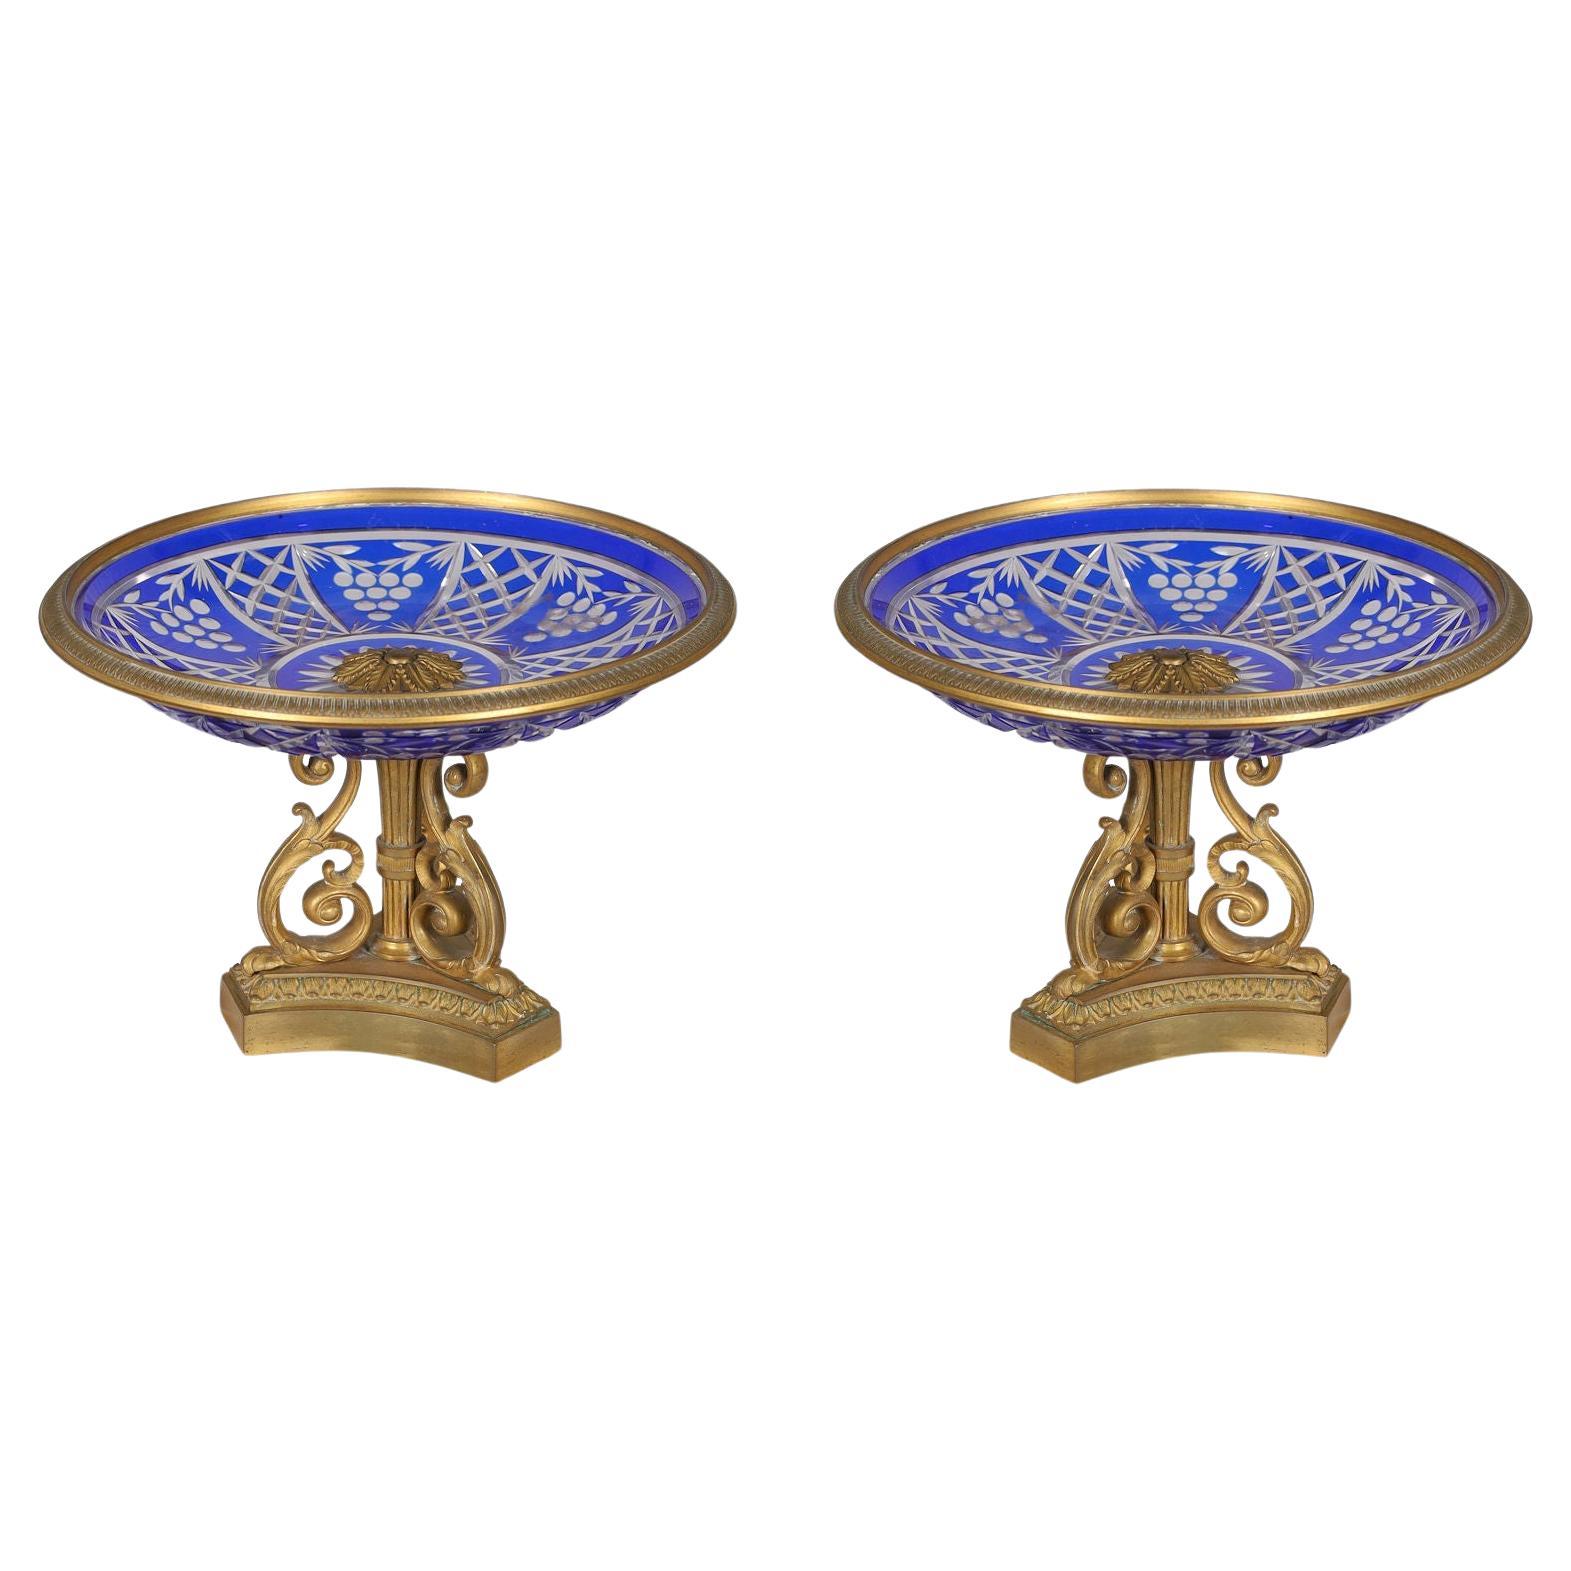 Pair Antique Cobalt Blue Cut Glass and Bronze Tazza / Compotes / Dishes